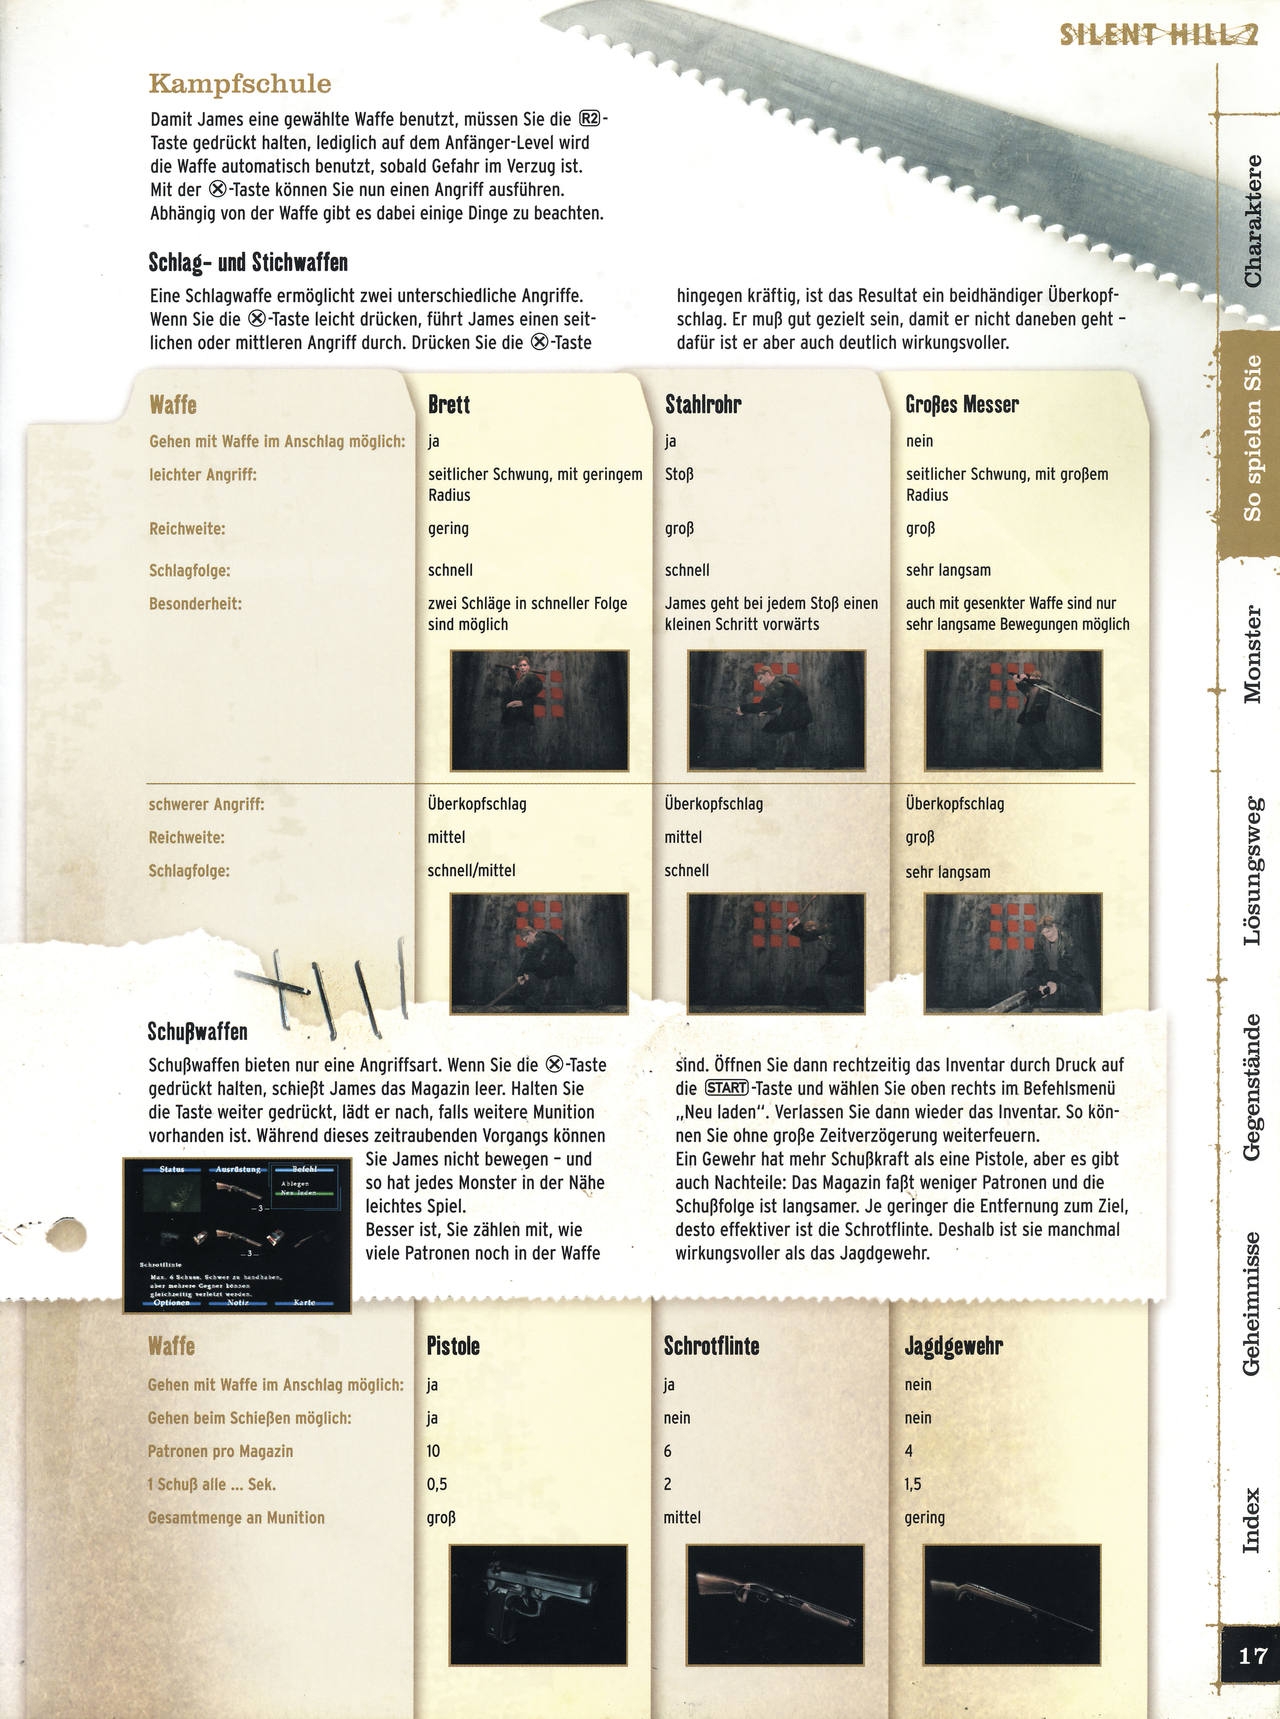 Silent Hill 2 Official Strategy Guide Authoritzed Collection 16